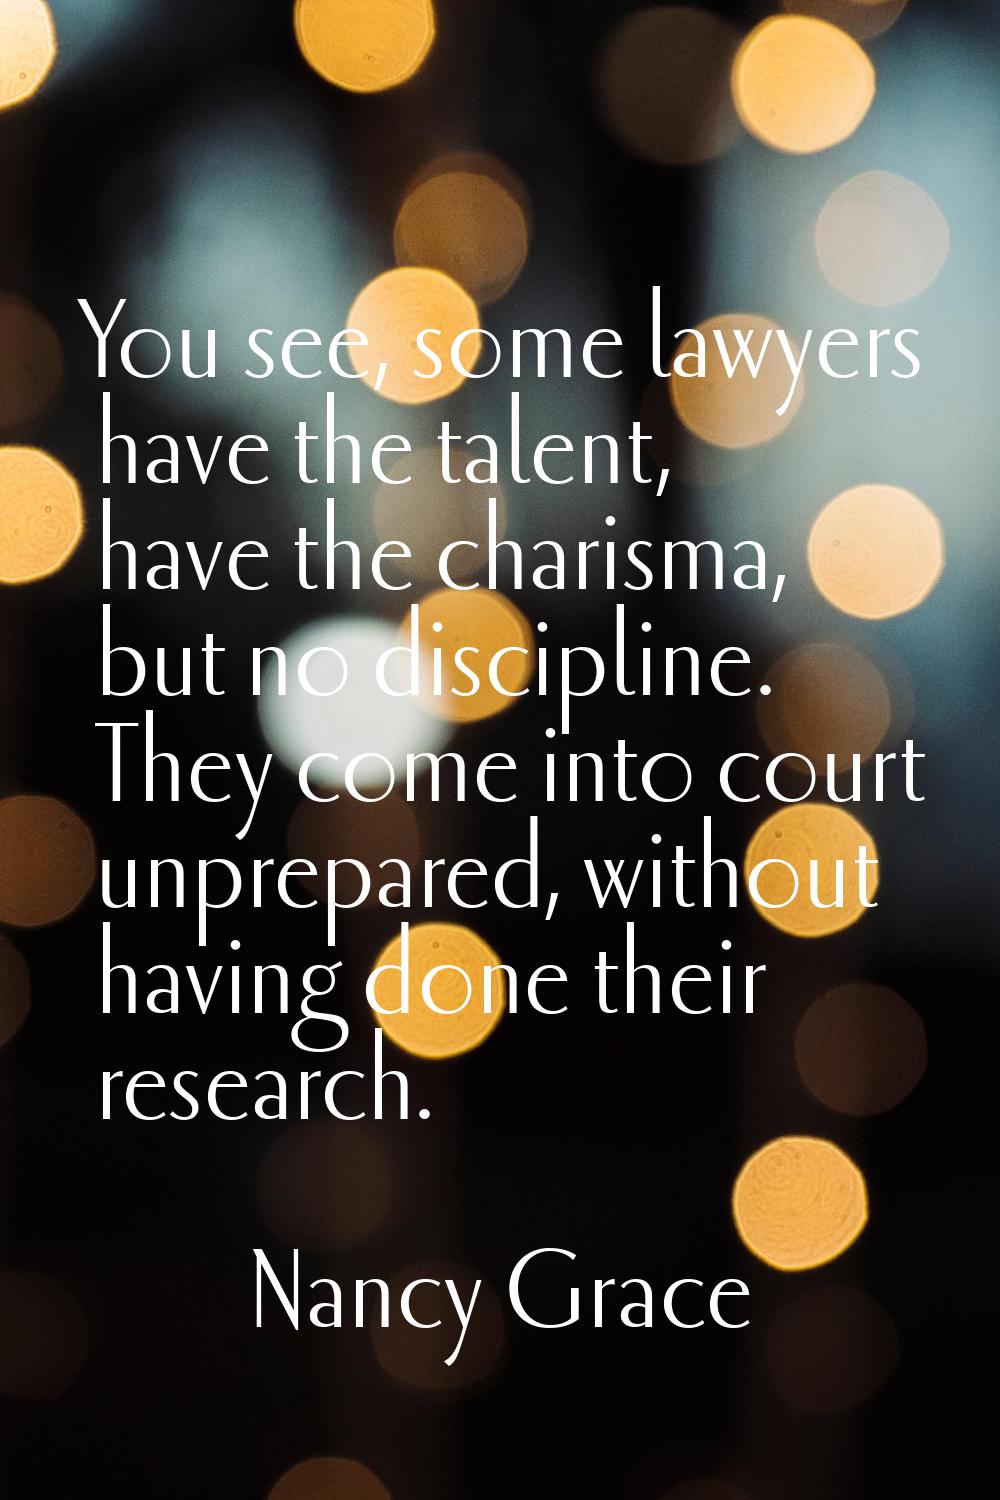 You see, some lawyers have the talent, have the charisma, but no discipline. They come into court u